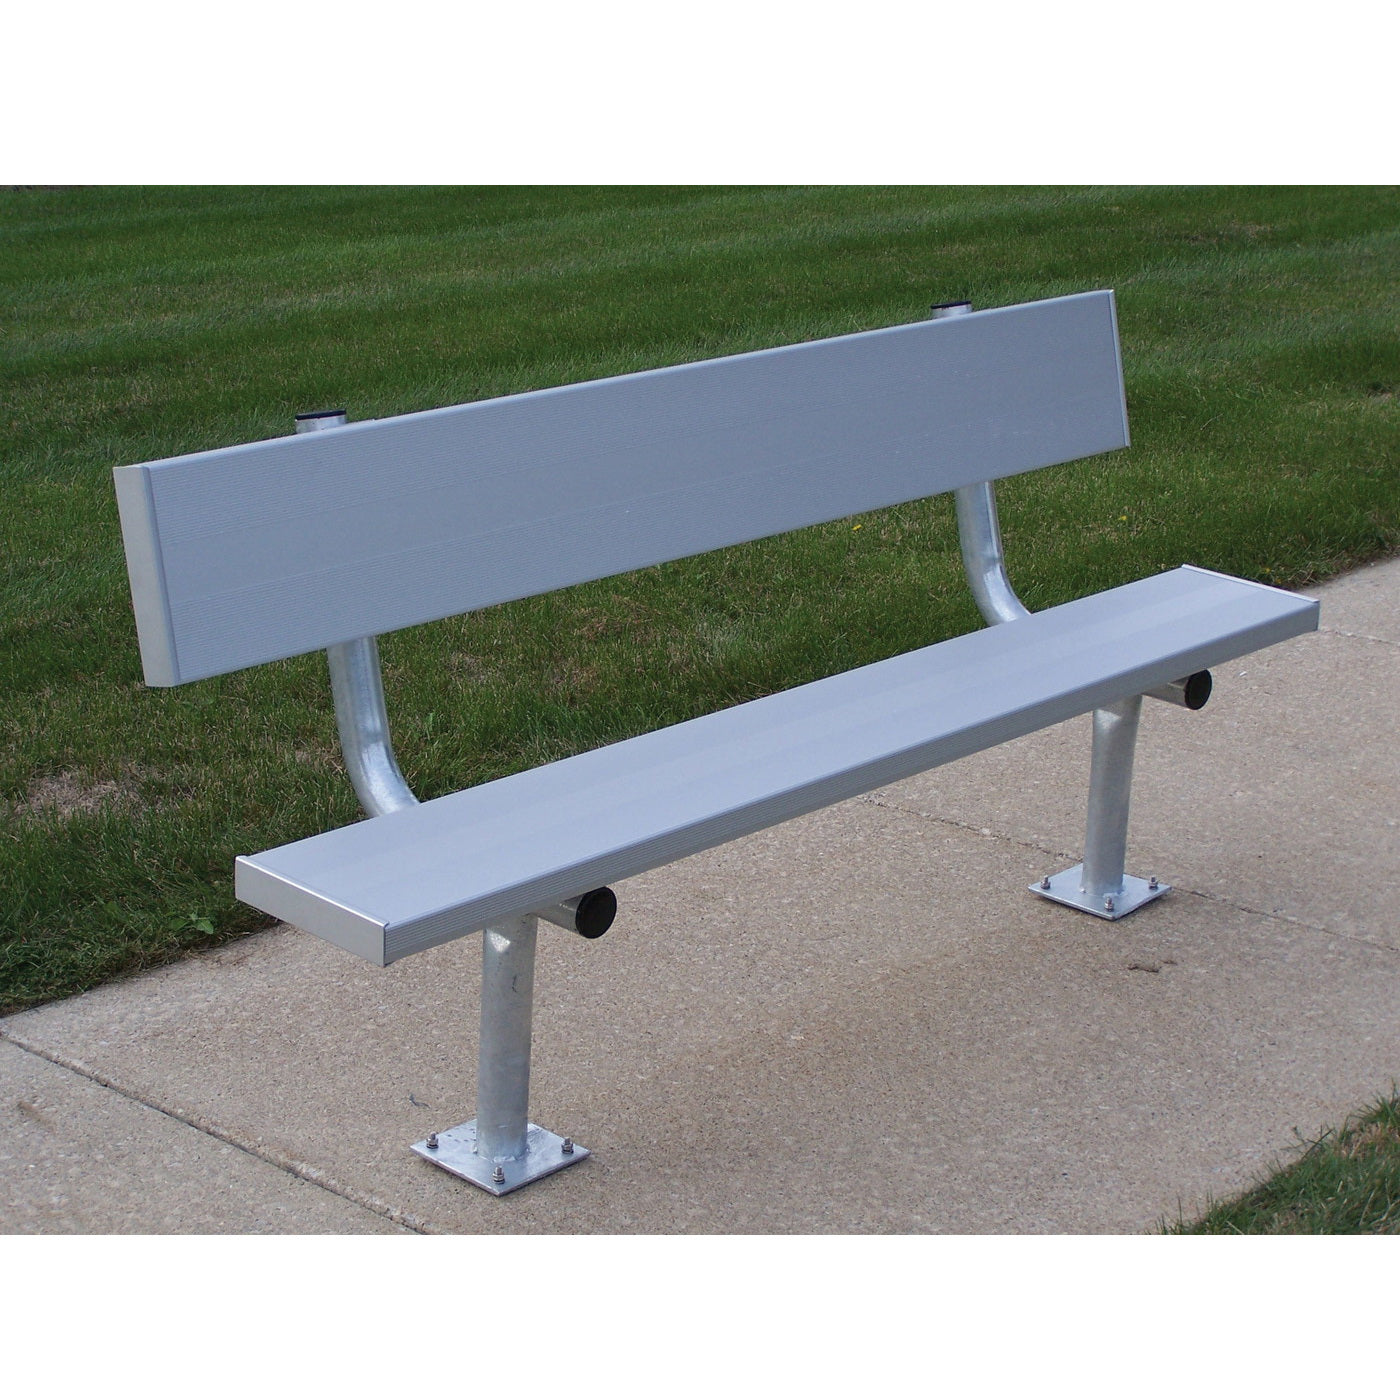 trigon sports 15 surface mount team bench with back